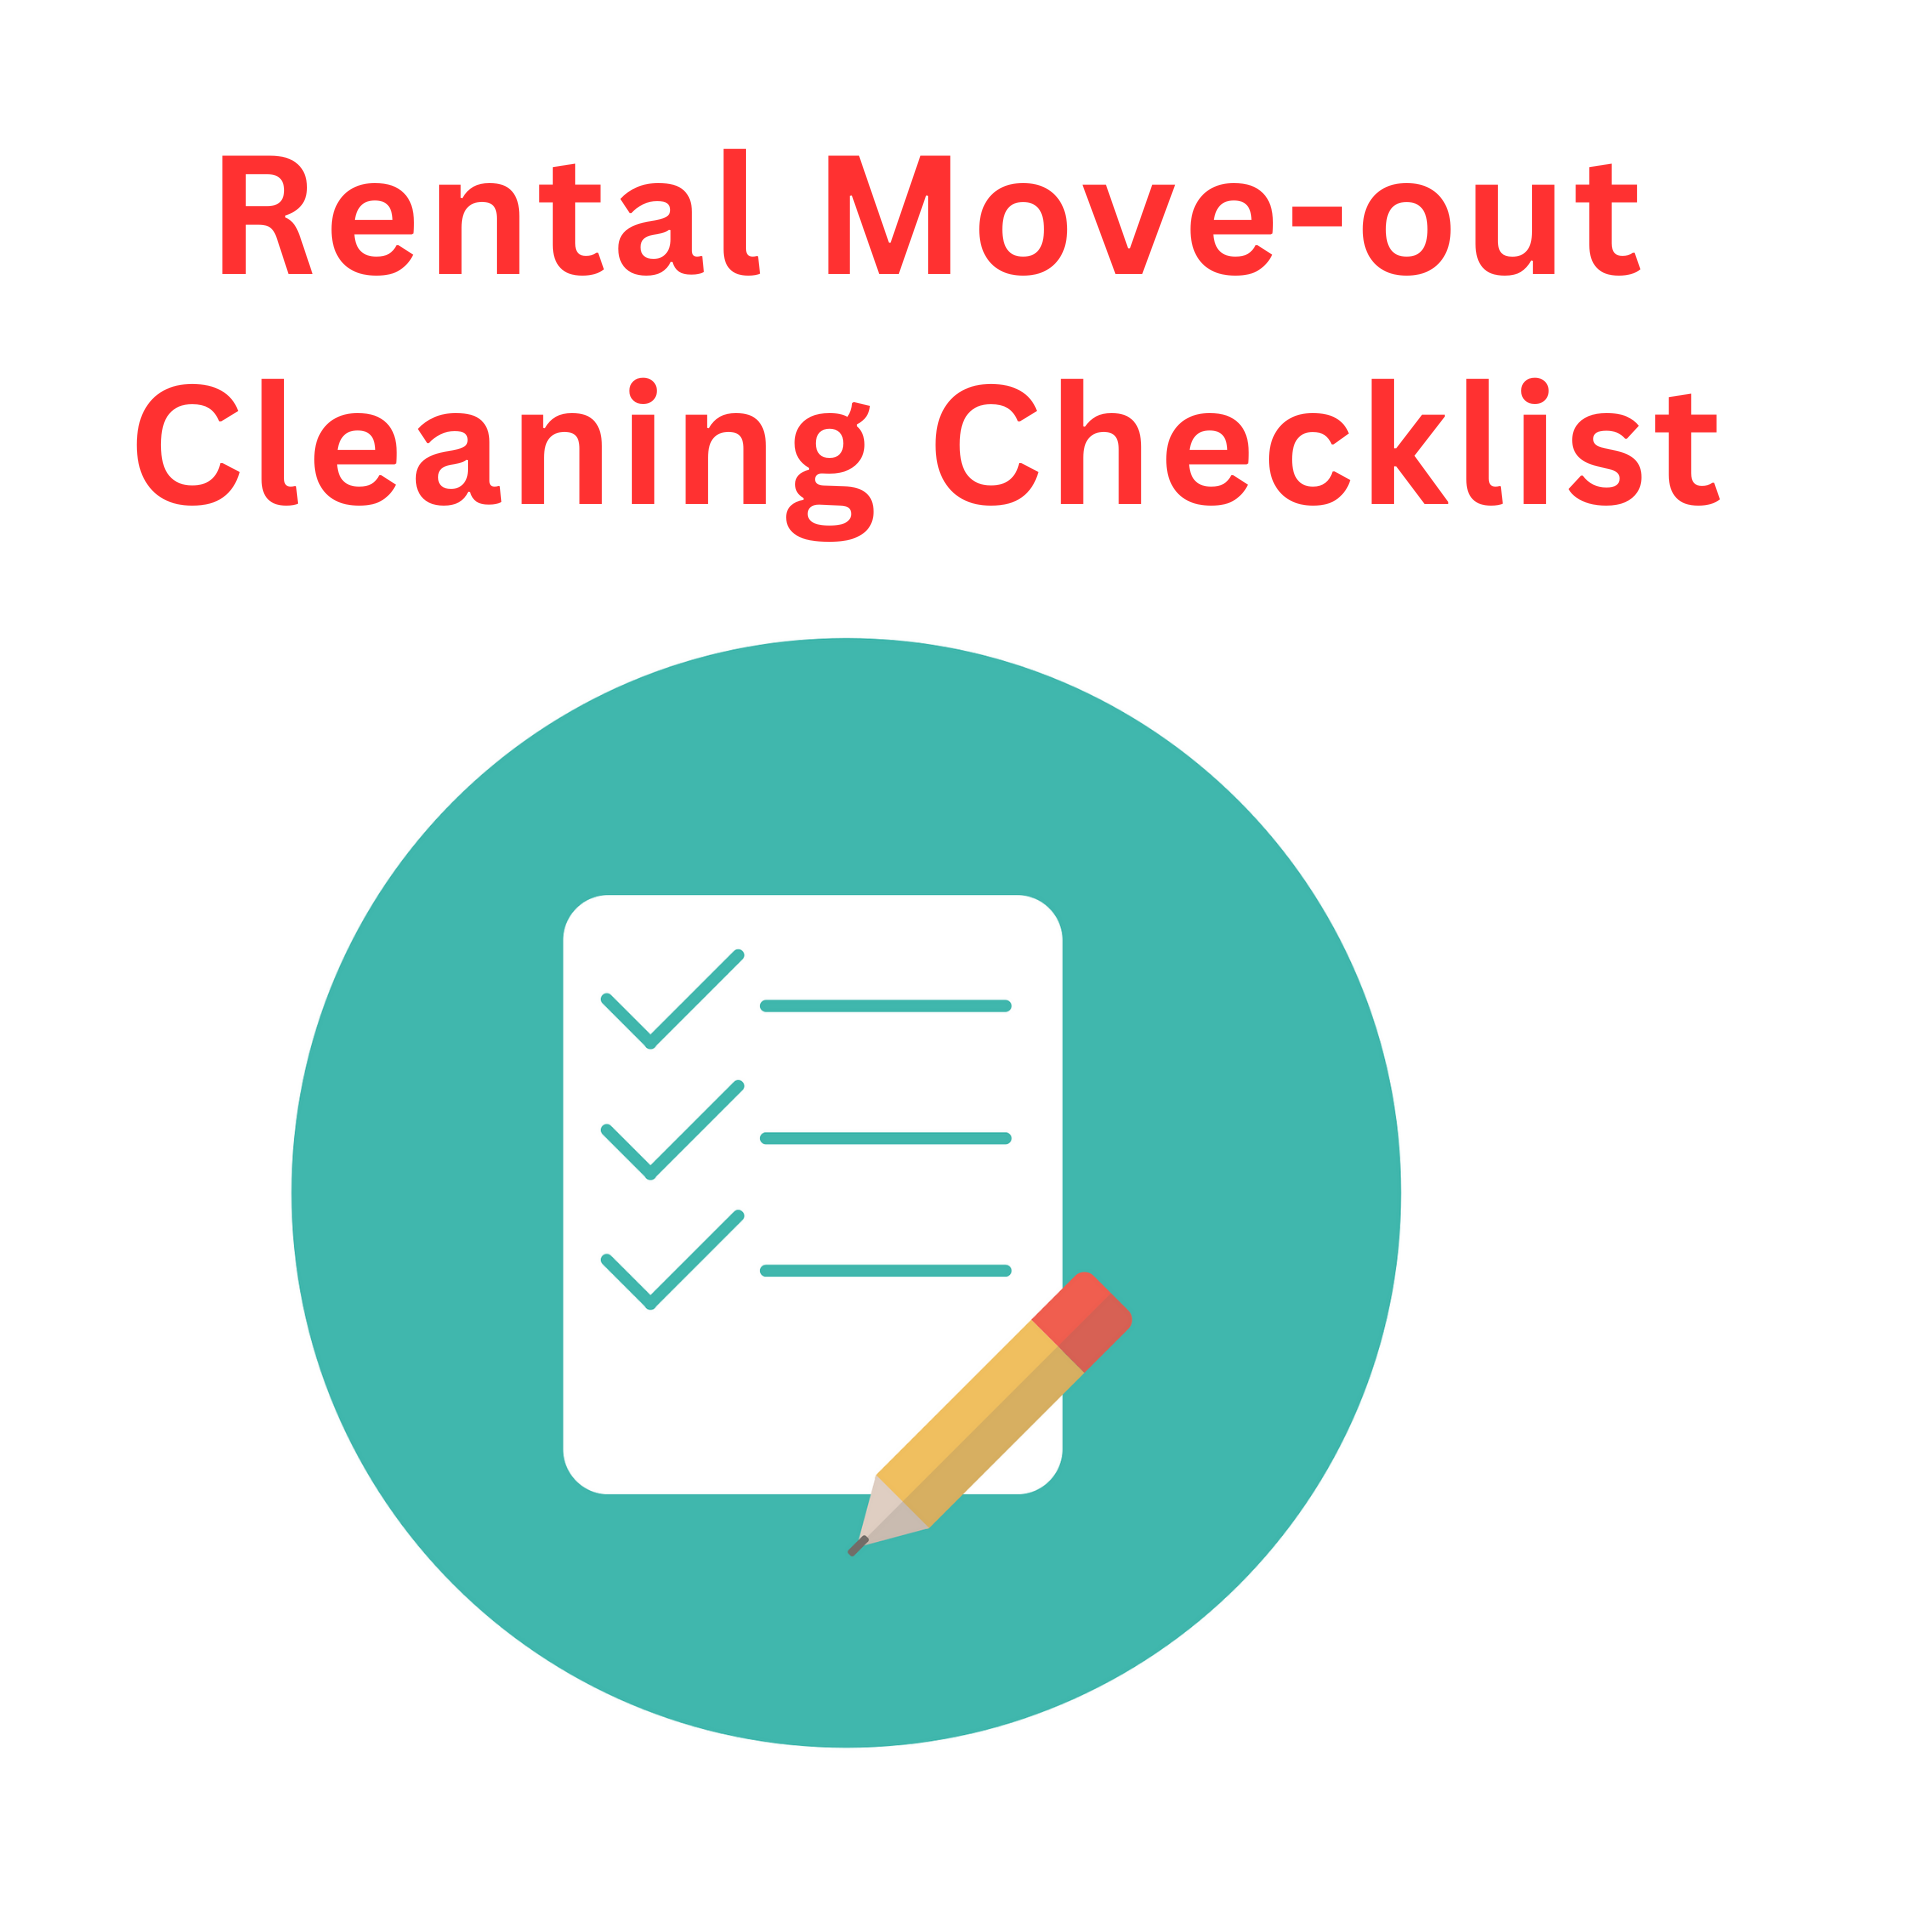 Rental Move-out Cleaning Checklist